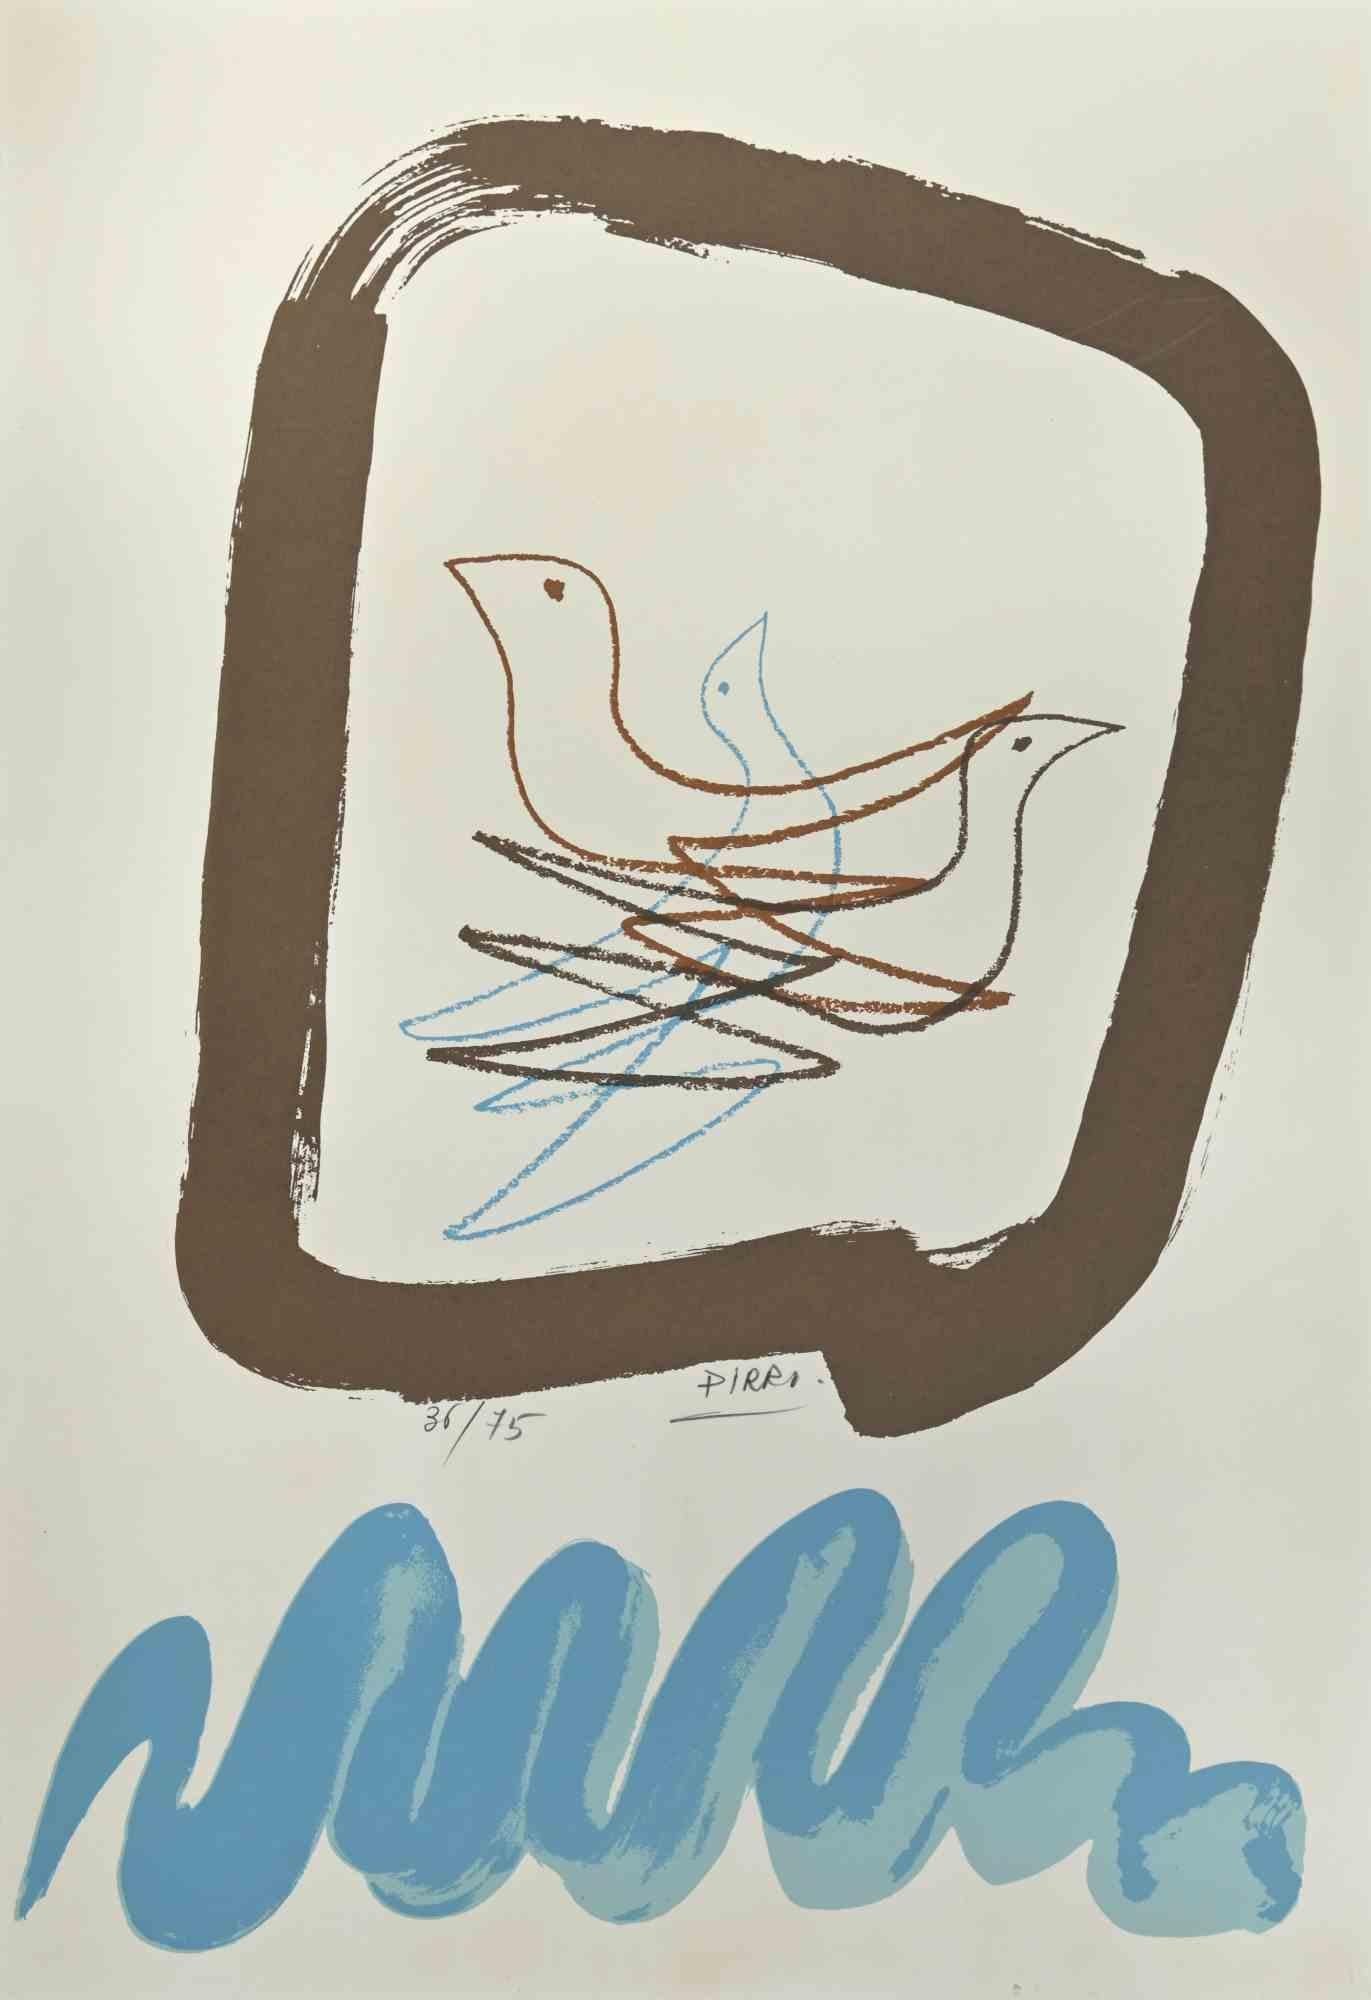 Pigeons is a contemporary artwork realized by Marcello Pirro in 1970s.

Mixed colored lithograph.

Hand signed and numbered on the lower margin.

Edition of 36/75.

Good conditions.

Marcello Pirro (Apricena, March 7, 1940 - November 29, 2008) was